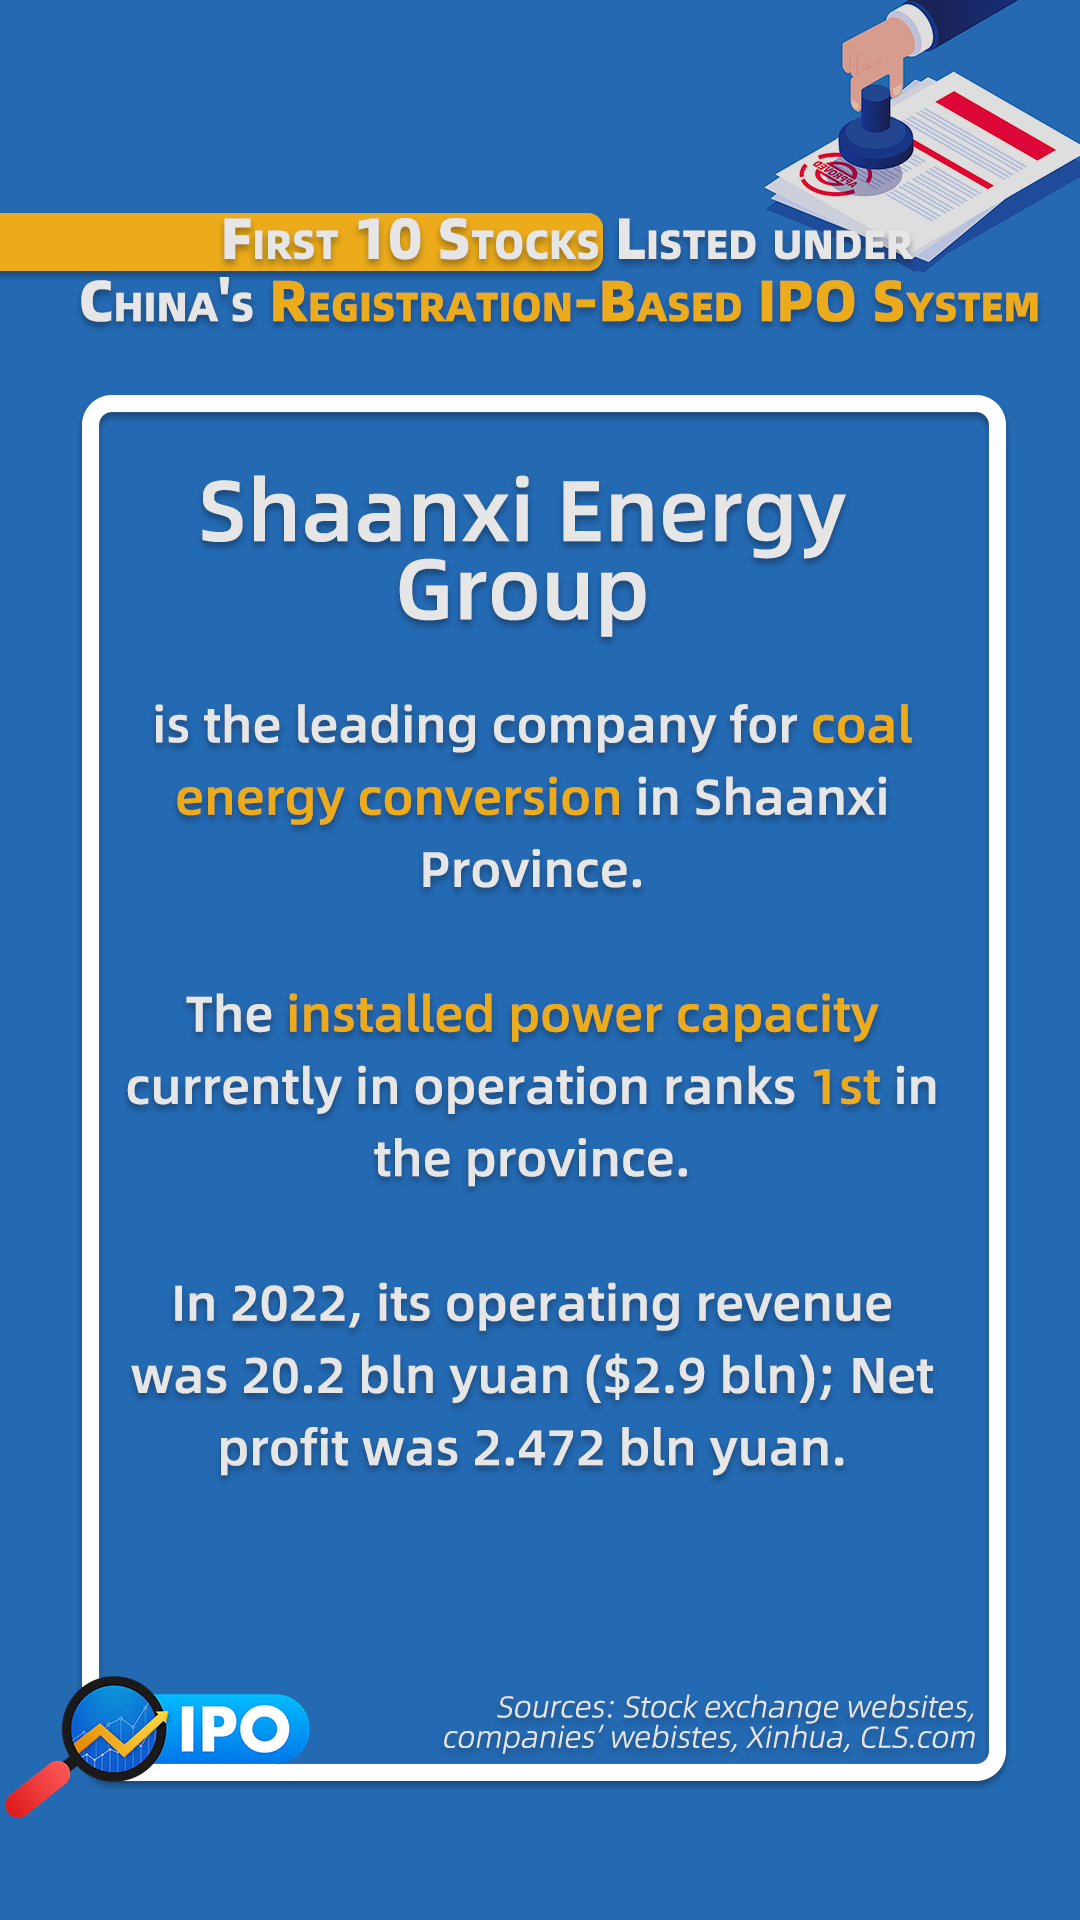 Shaanxi Energy Group, one of the 10 listed companies